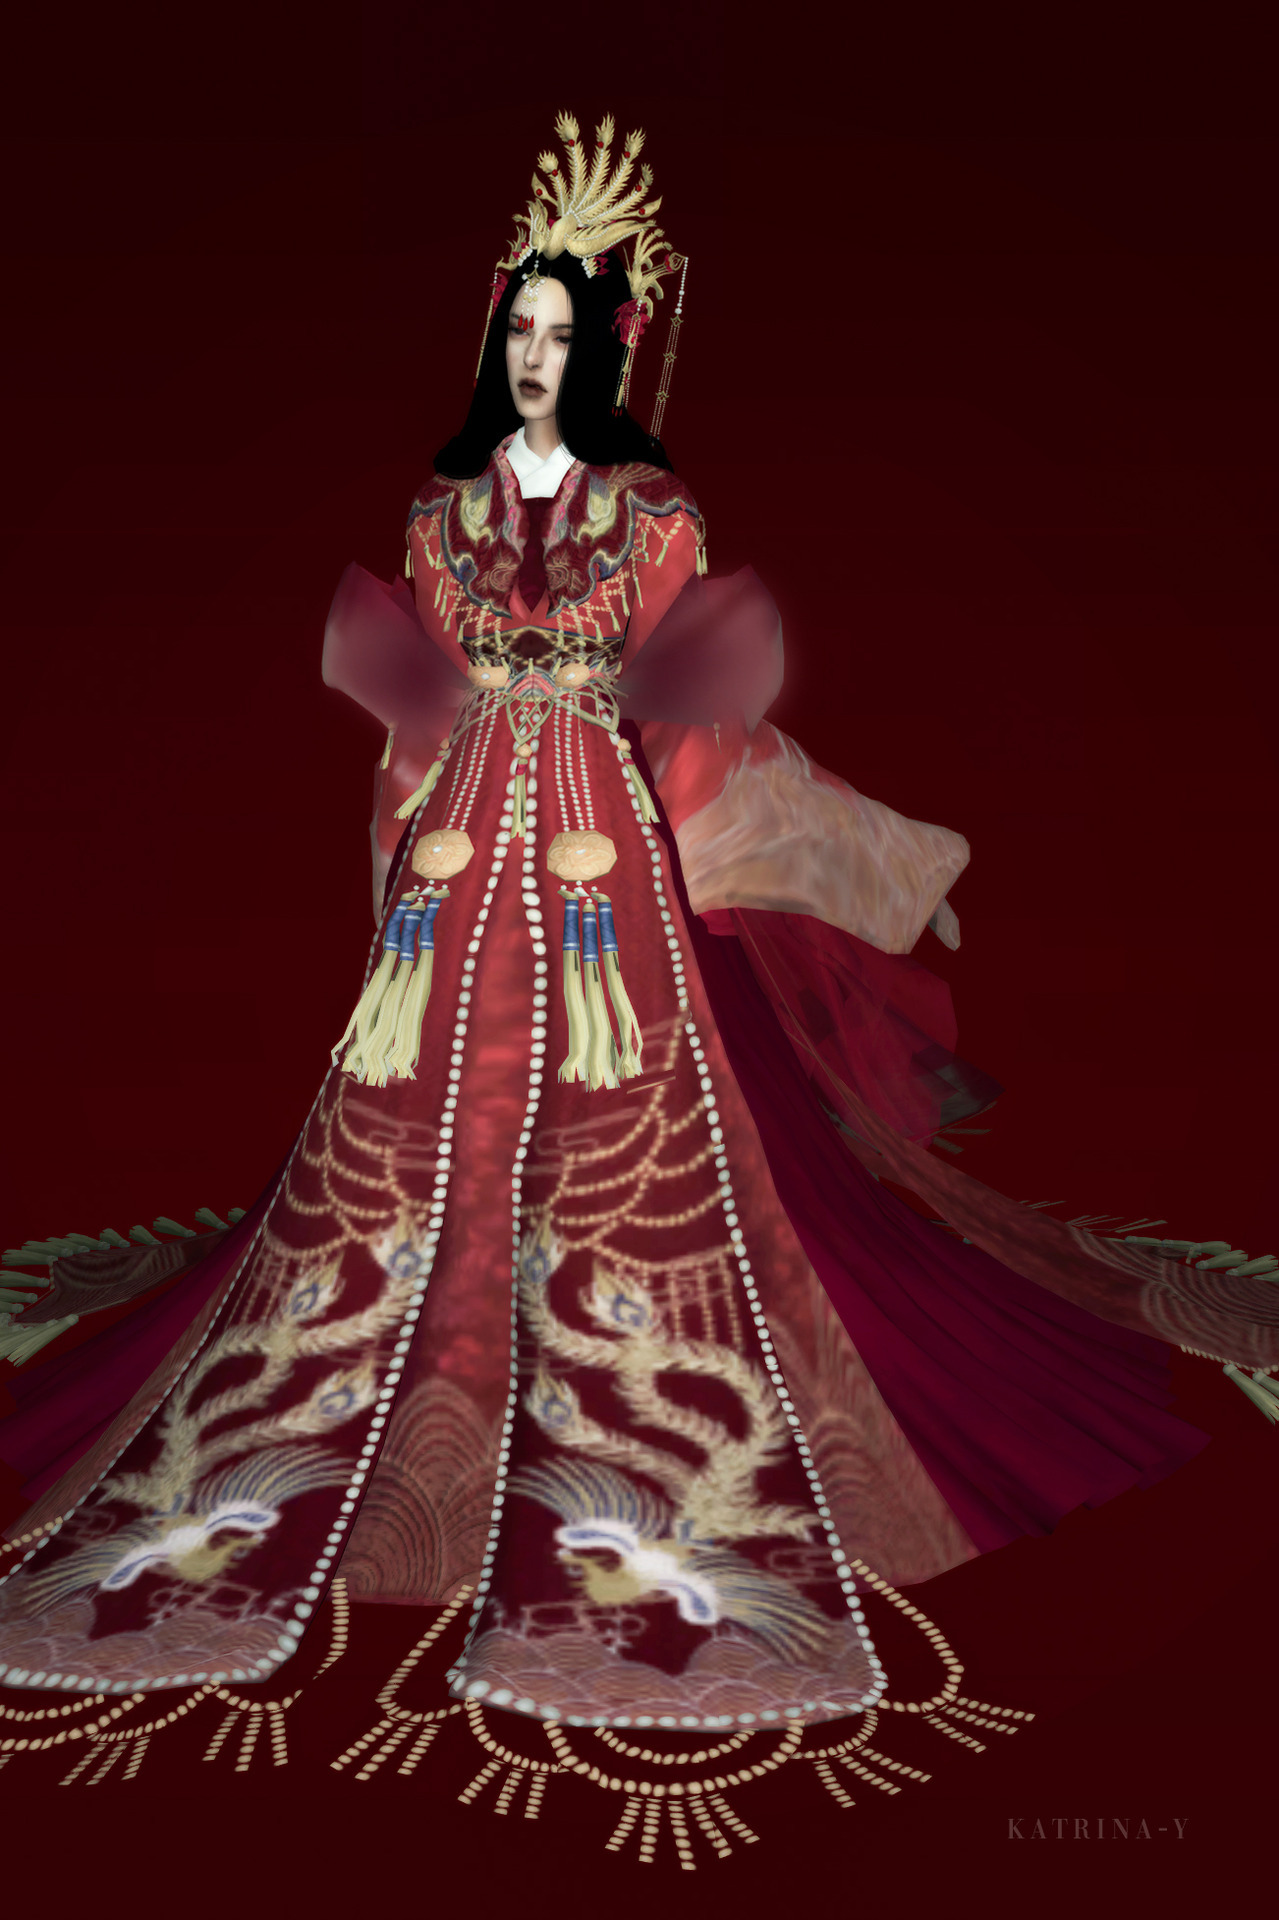 katrina-y:
â€œ Why so pretty!!! Chinese style wedding clothes @zouyousims
thanks all cc creators
â€
å•Šå•Šå•Šå•Šå•Šå•Š~è¿™é€Ÿåº¦~ï¼å¥½å¿«ï¼